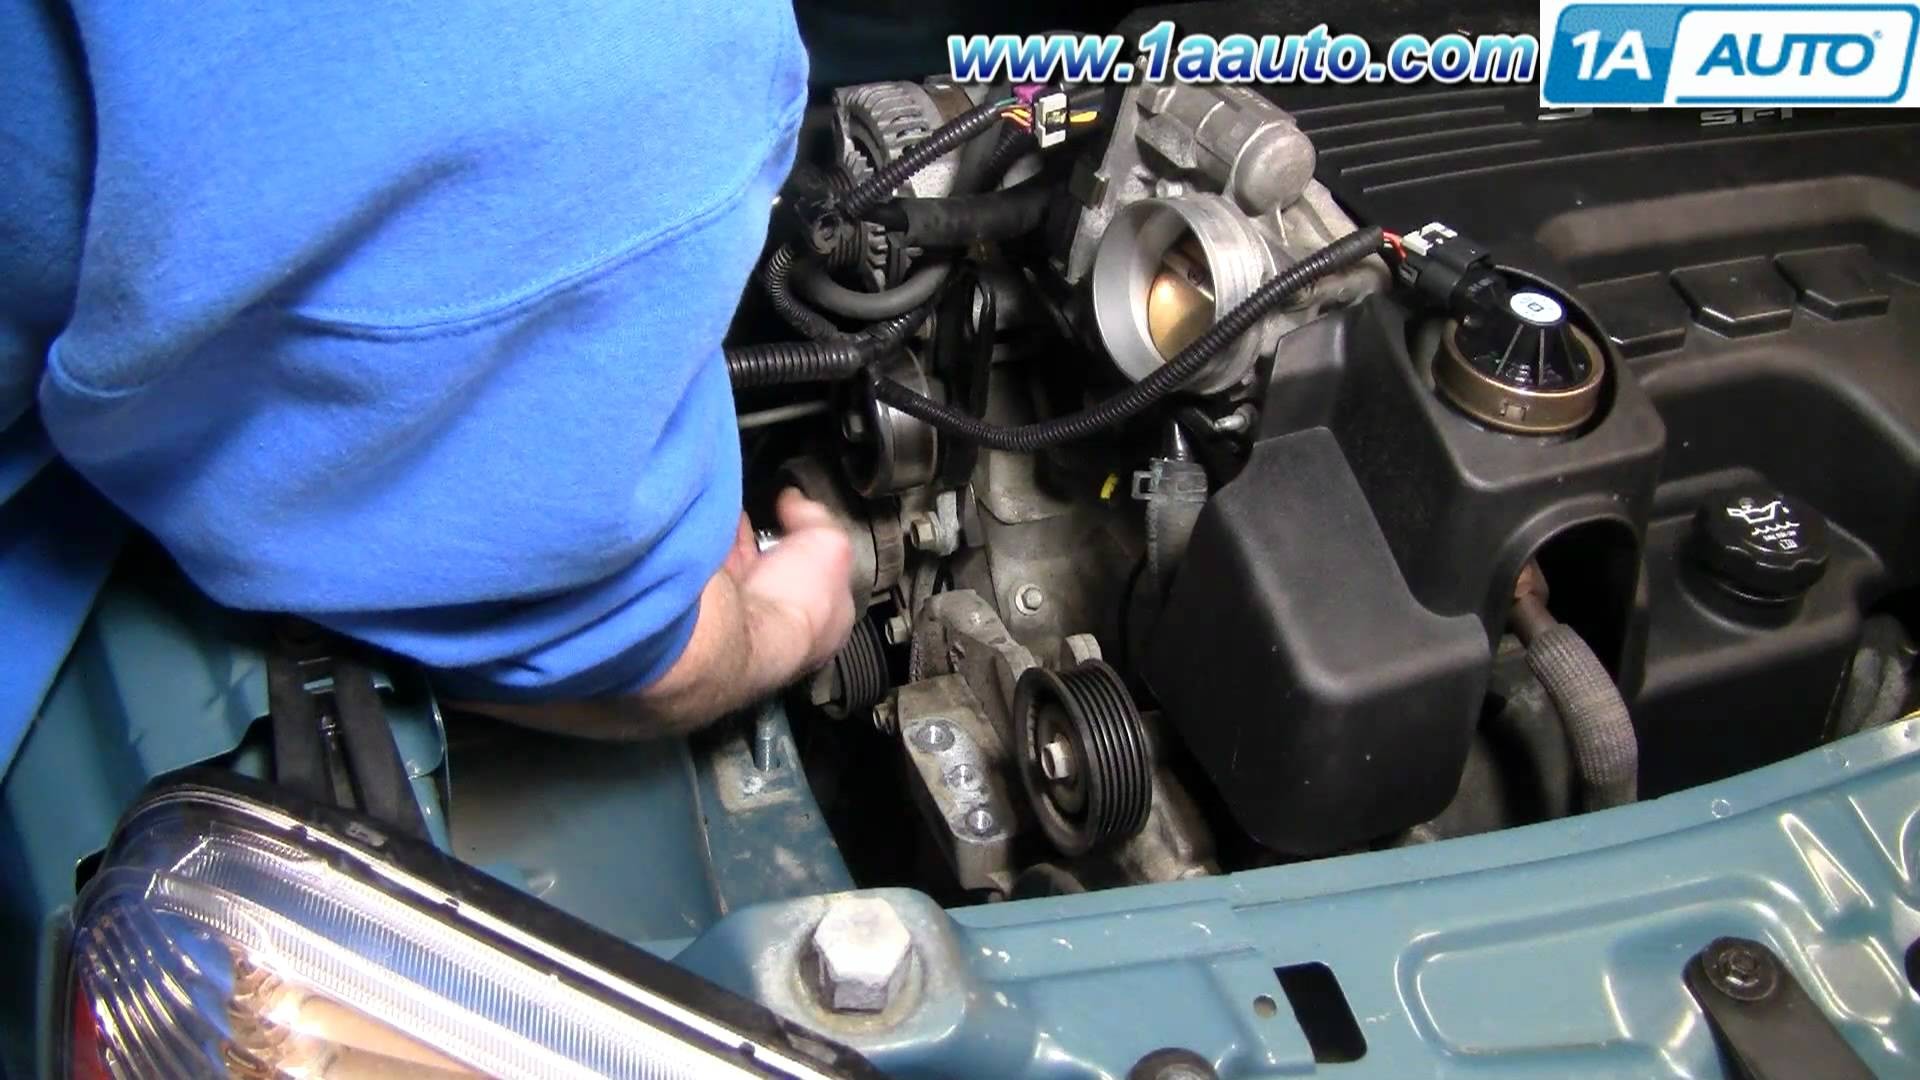 2007 Chevy Equinox Engine Diagram How to Install Replace Serpentine Belt Tensioner Chevy Equinox 3 4l Of 2007 Chevy Equinox Engine Diagram